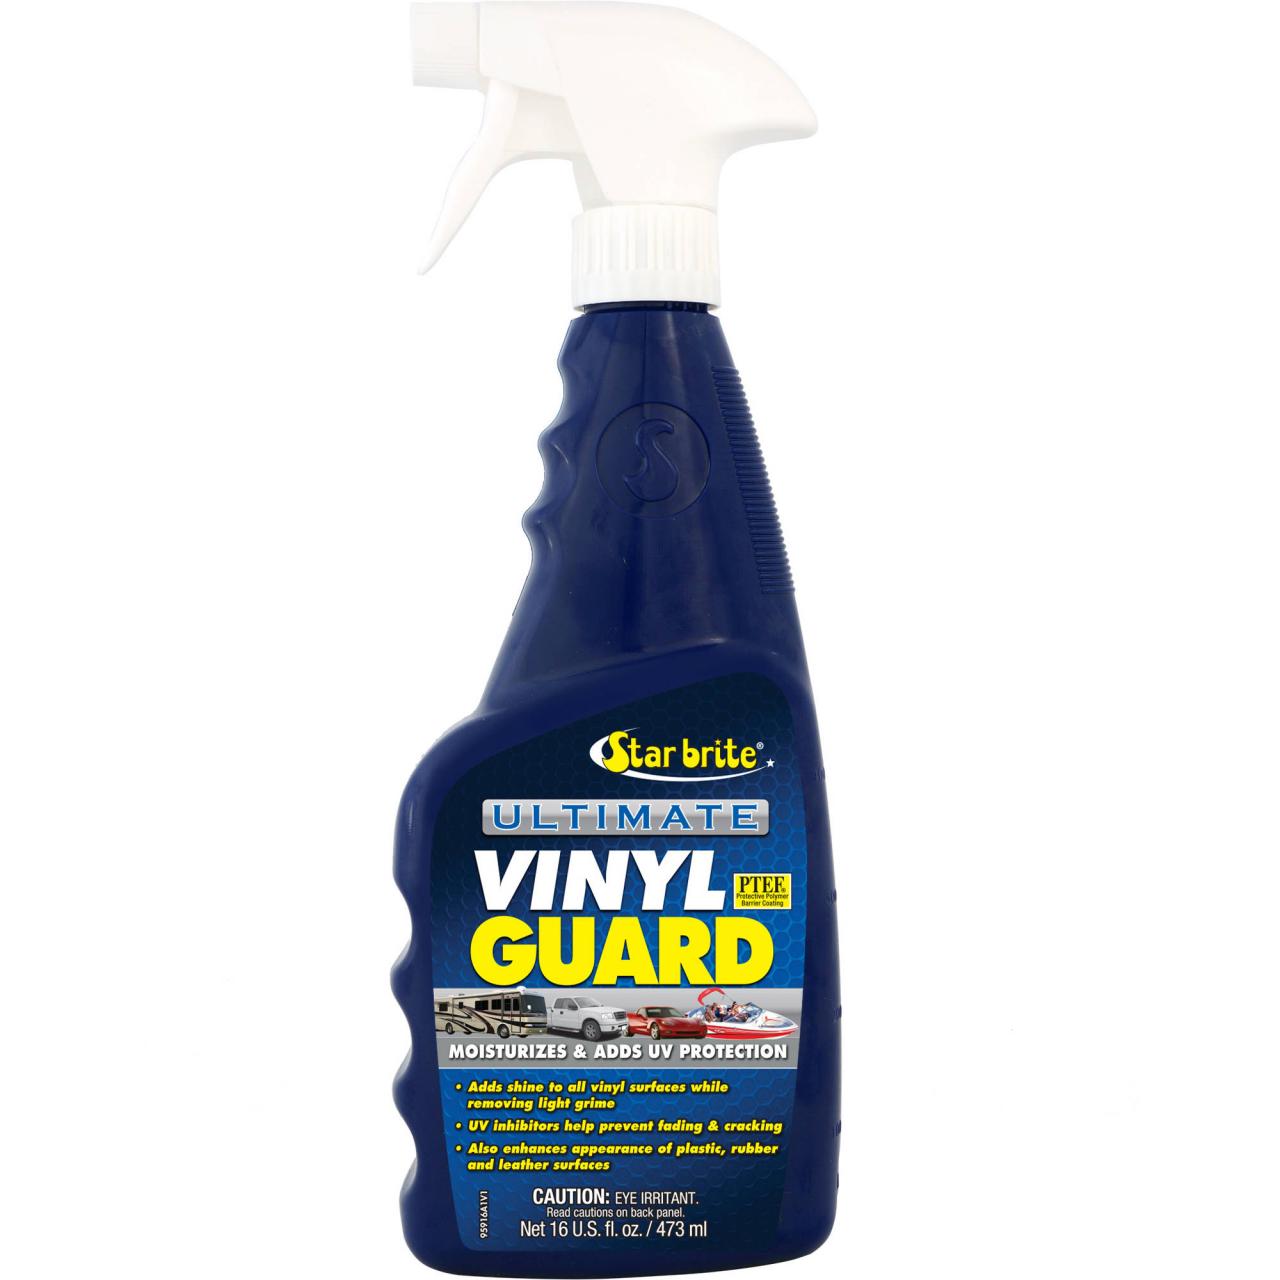 Buy Star brite Ultimate Vinyl Guard Protectant with PTEF - 32 oz. Sprayer  Online in Hungary. B00TUNQFQG